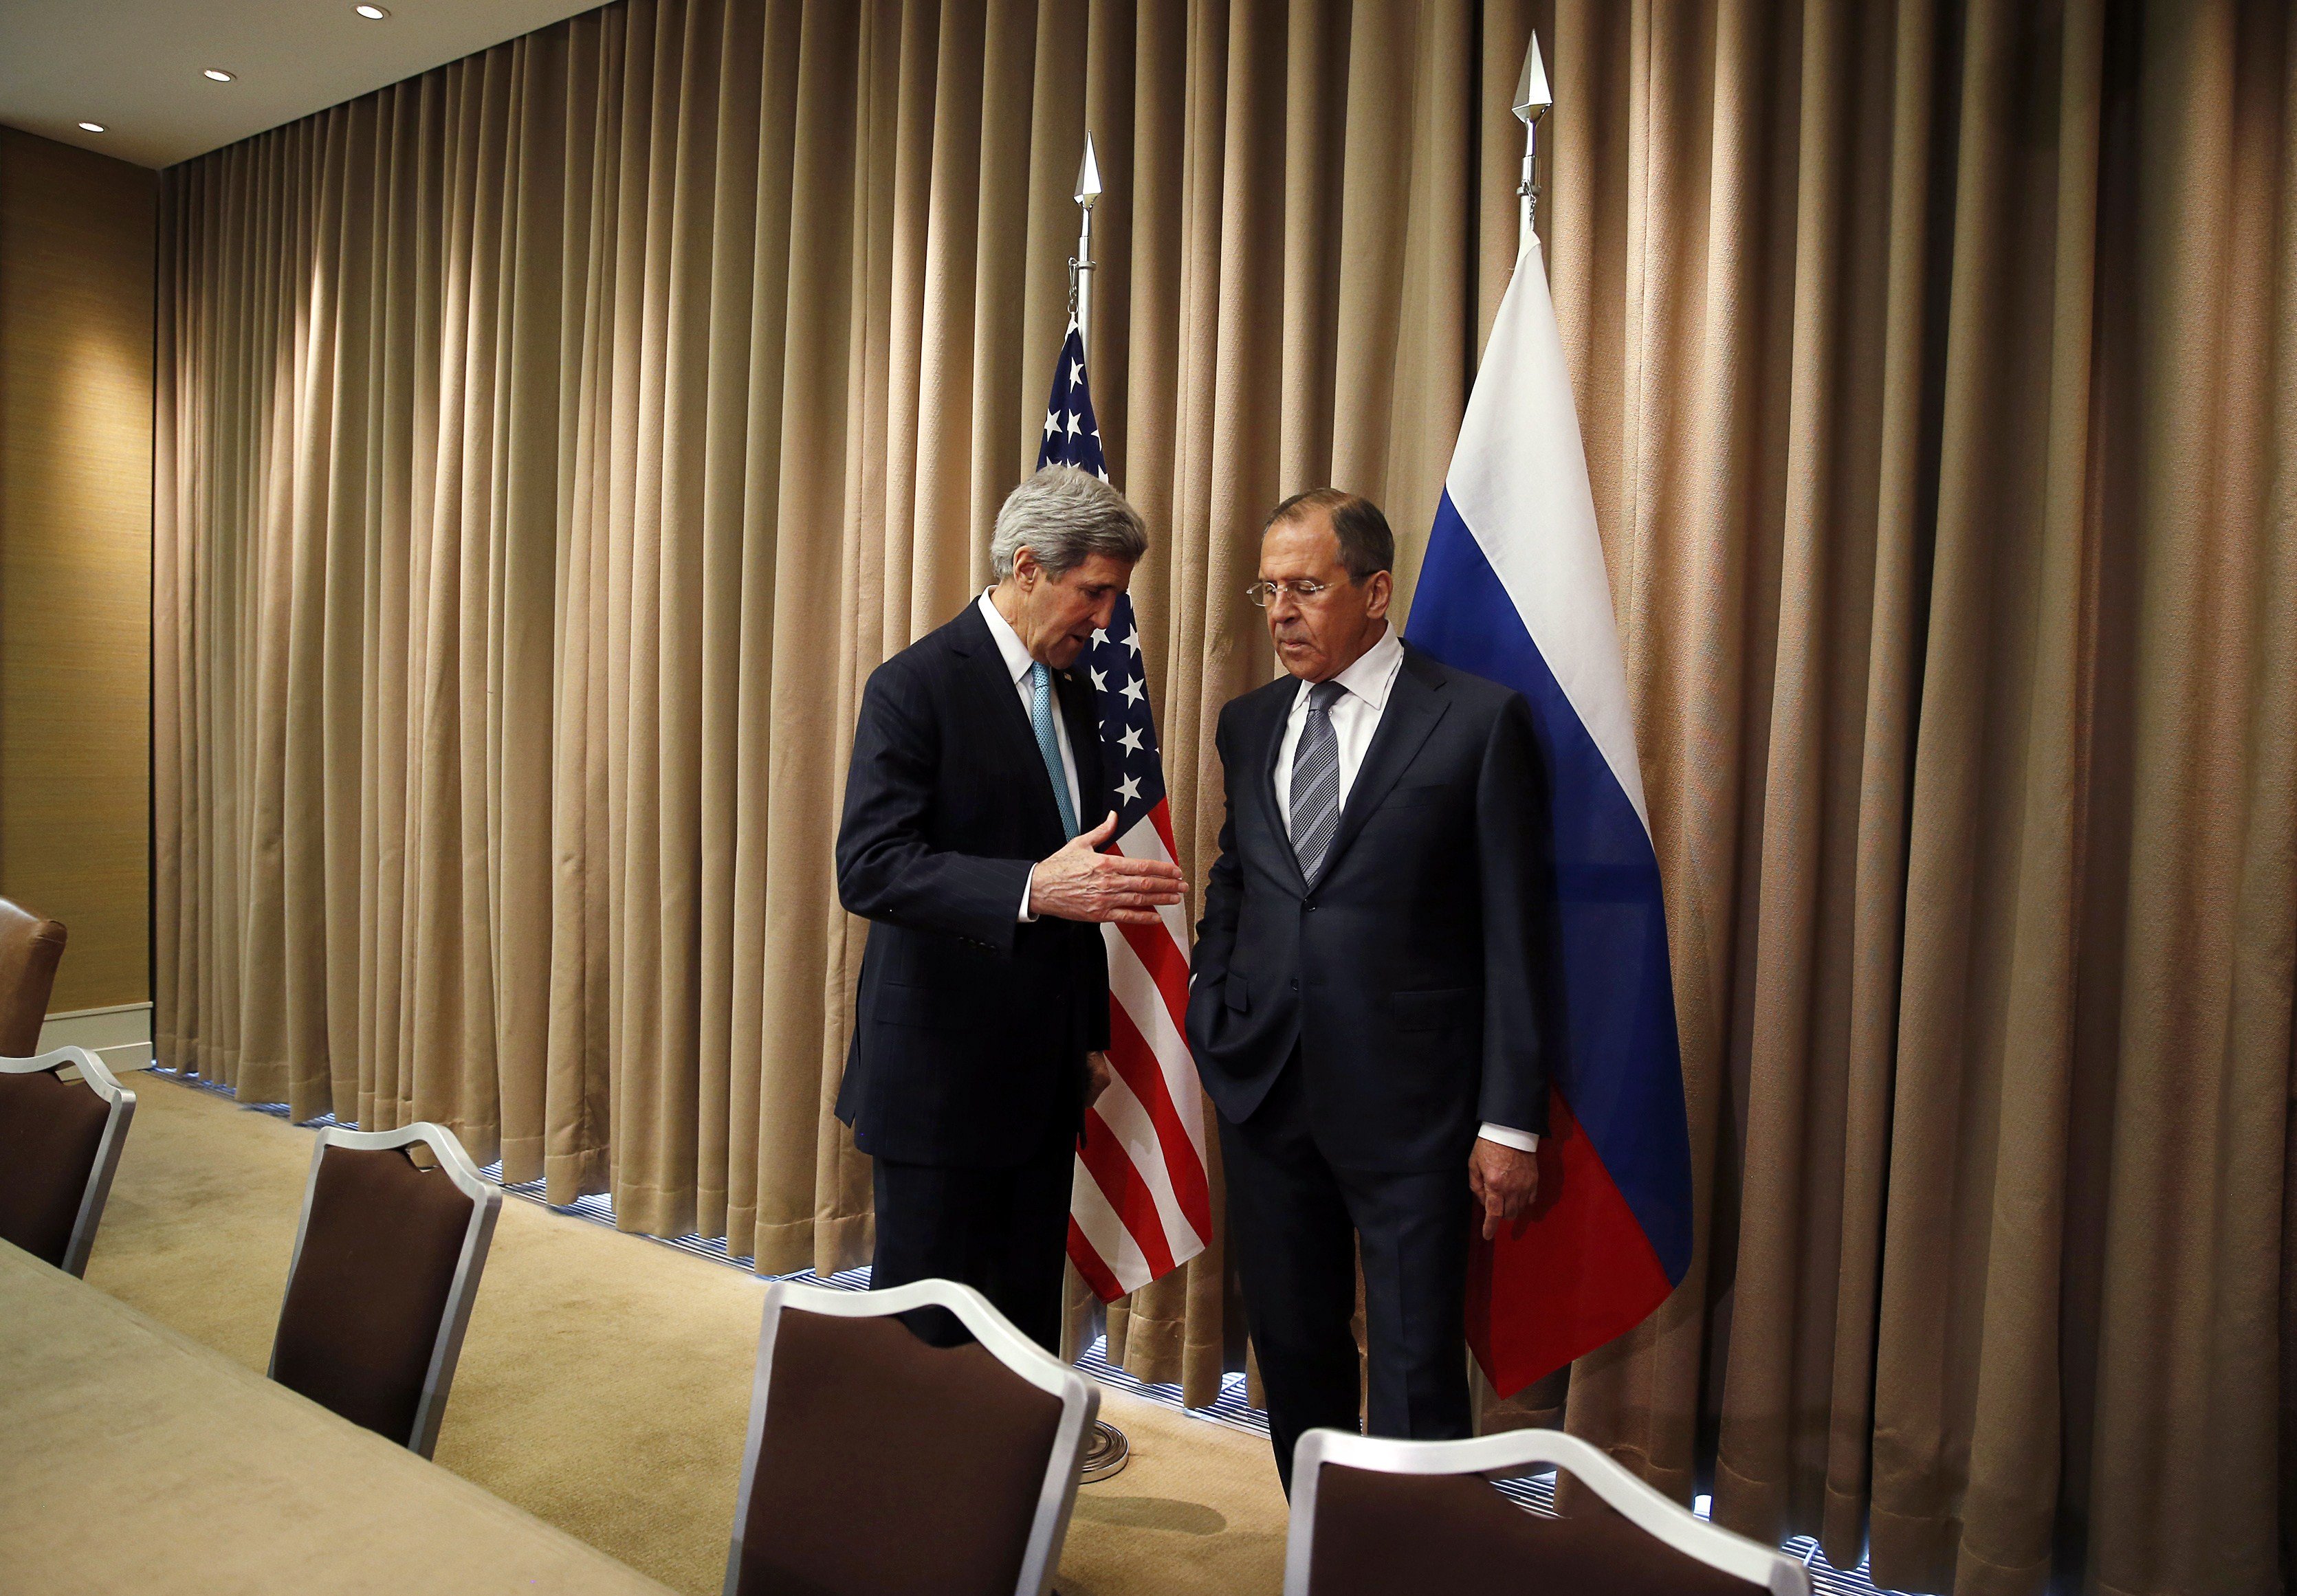 aFrom left: U.S. Secretary of State John Kerry talks with Russian Foreign minister Sergei Lavrov at the start of a bilateral meeting to discuss the ongoing situation in Ukraine on April 17, 2014 in Geneva.TOPSHOTS-SWITZERLAND-UKRAINE-EU-RUSSIA-POLITICS-CRISIS-KERRY